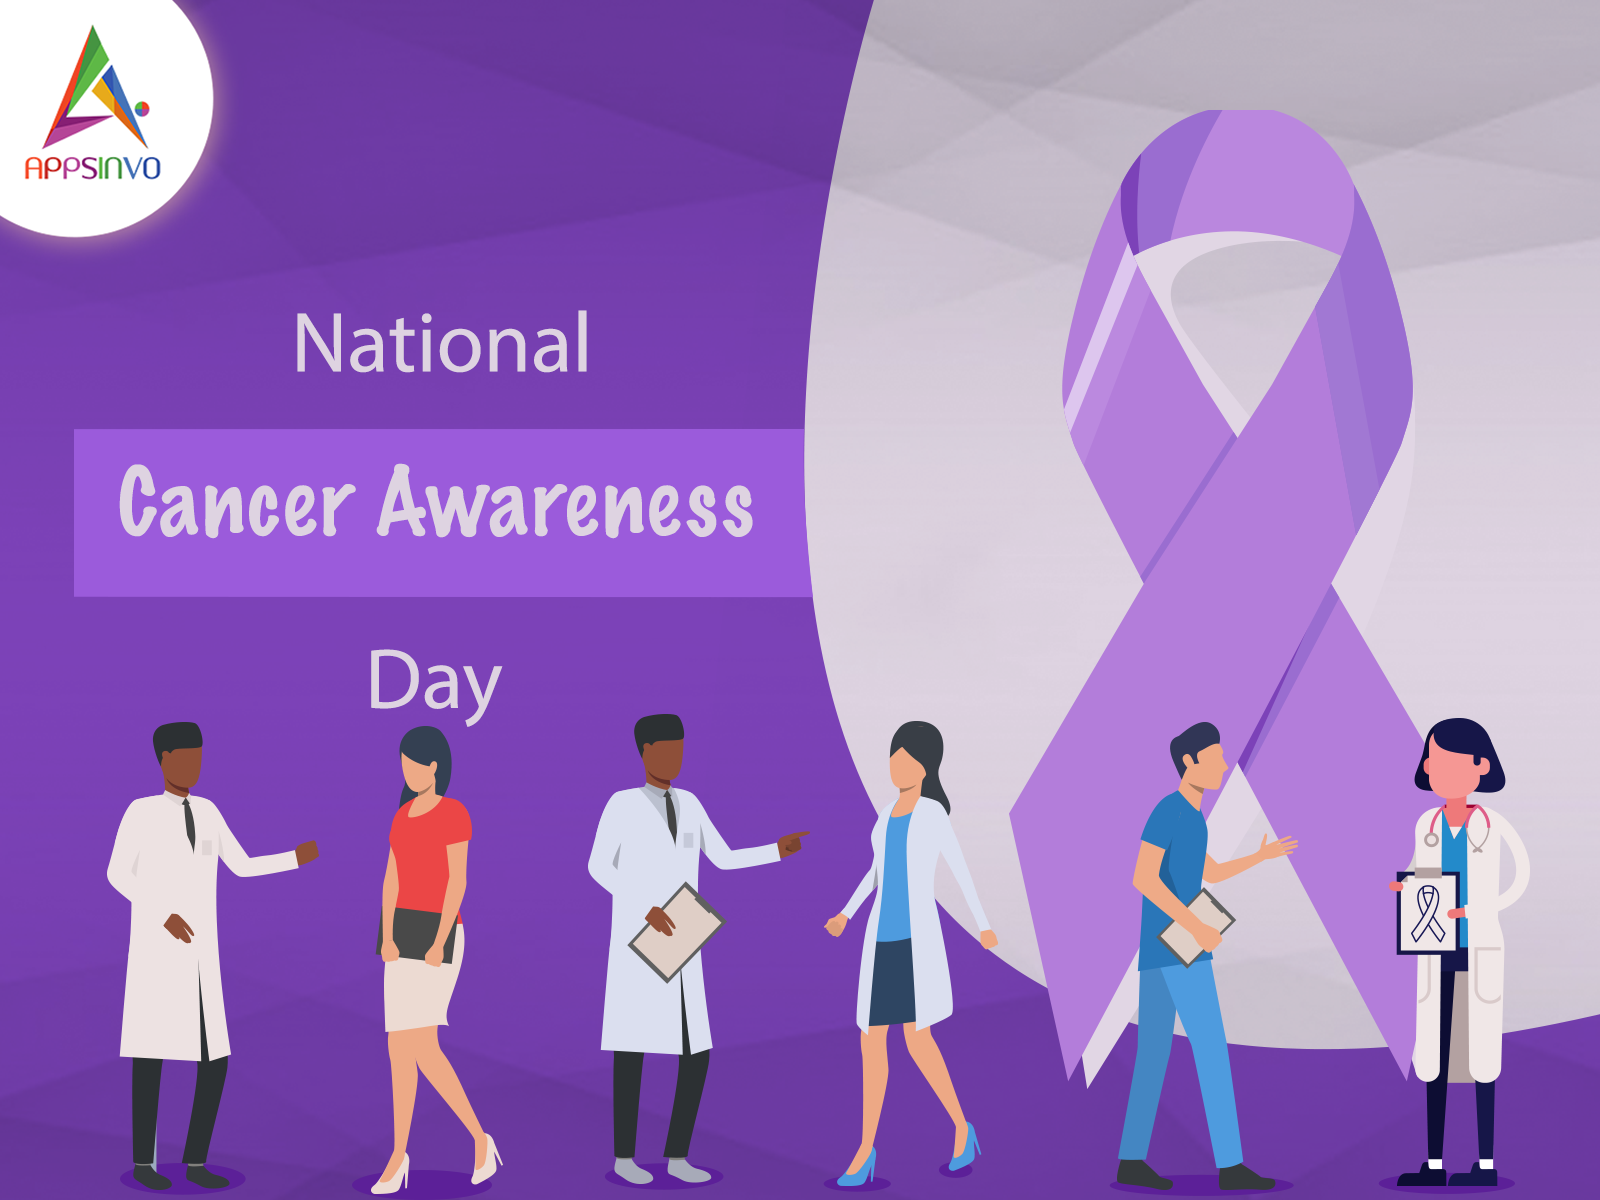 National Cancer Awareness Day by Appsinvo on Dribbble